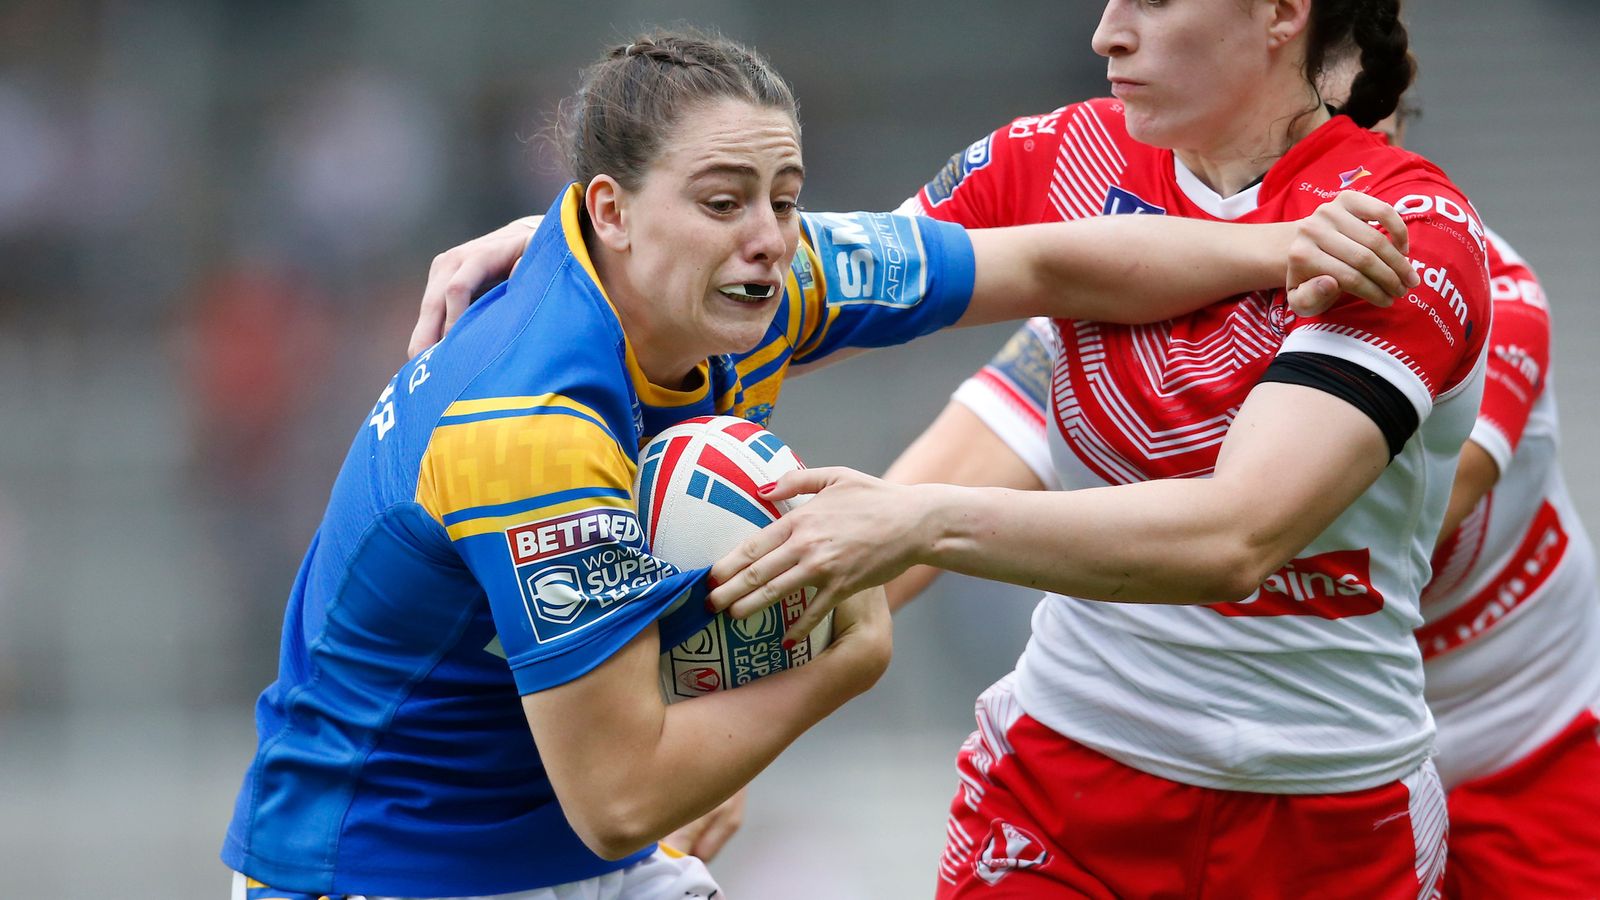 St Helens 18-20 Leeds Rhinos: Late Fran Goldthorp stunner sees visitors win Women’s Super League clash